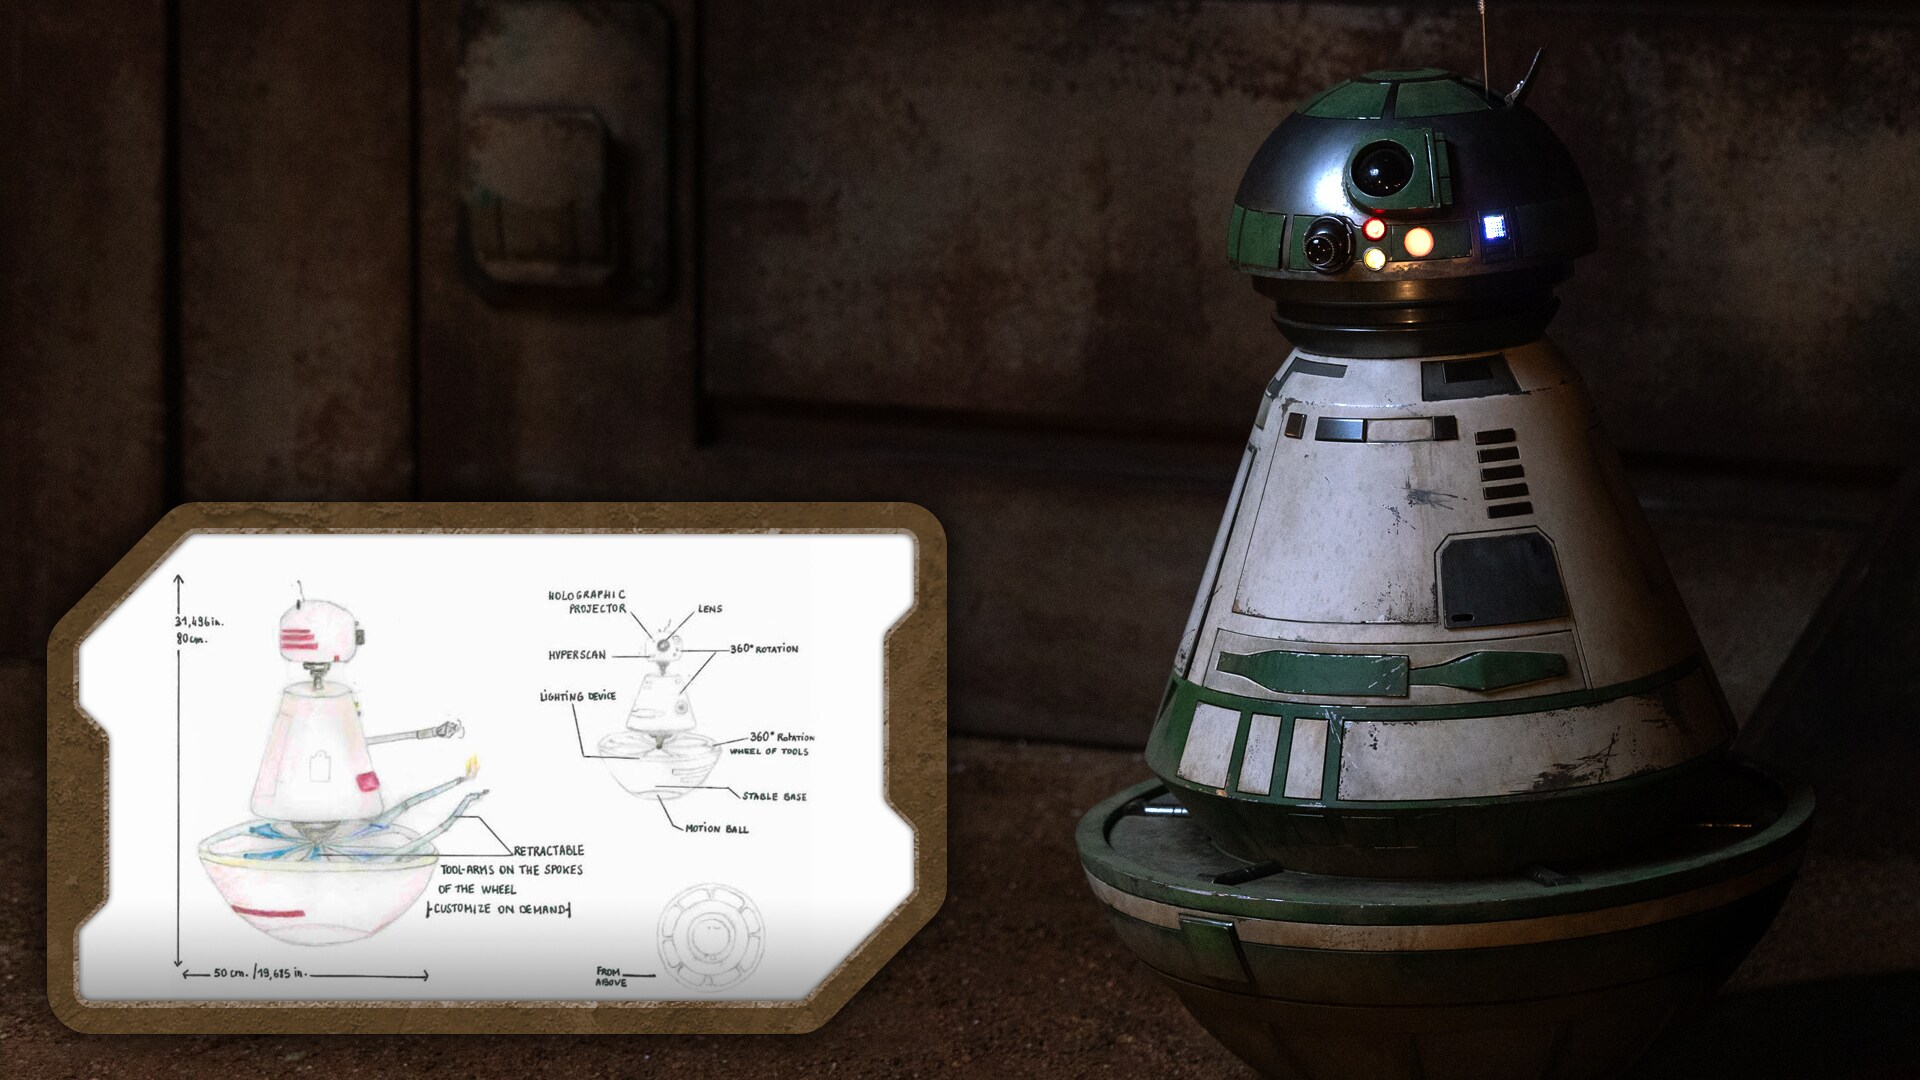 Among the droids helping with the efforts on Jabiim is KP-1, a winning design submitted by Camill...